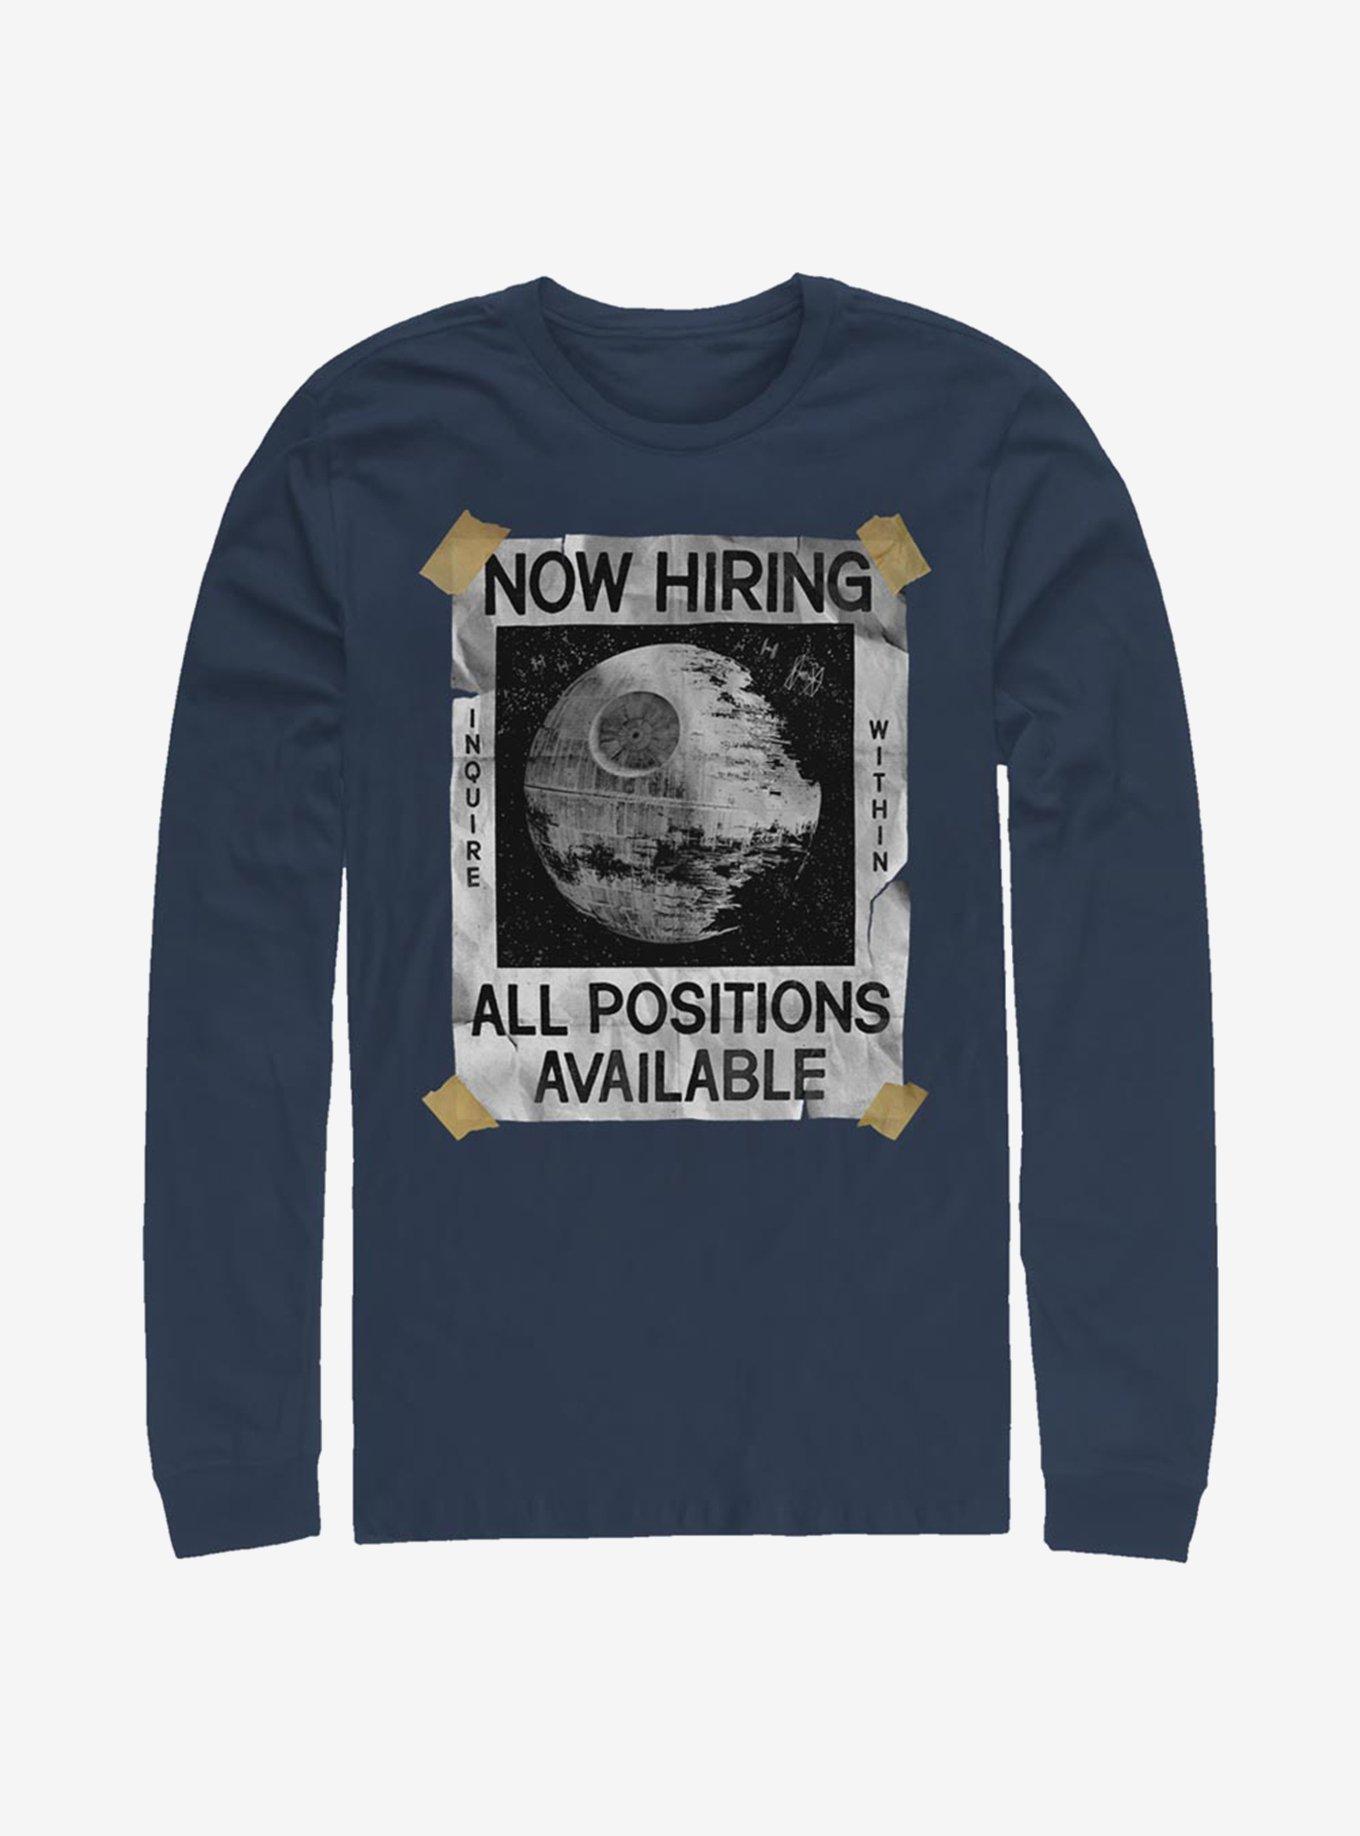 Star Wars All Positions Available Long-Sleeve T-Shirt